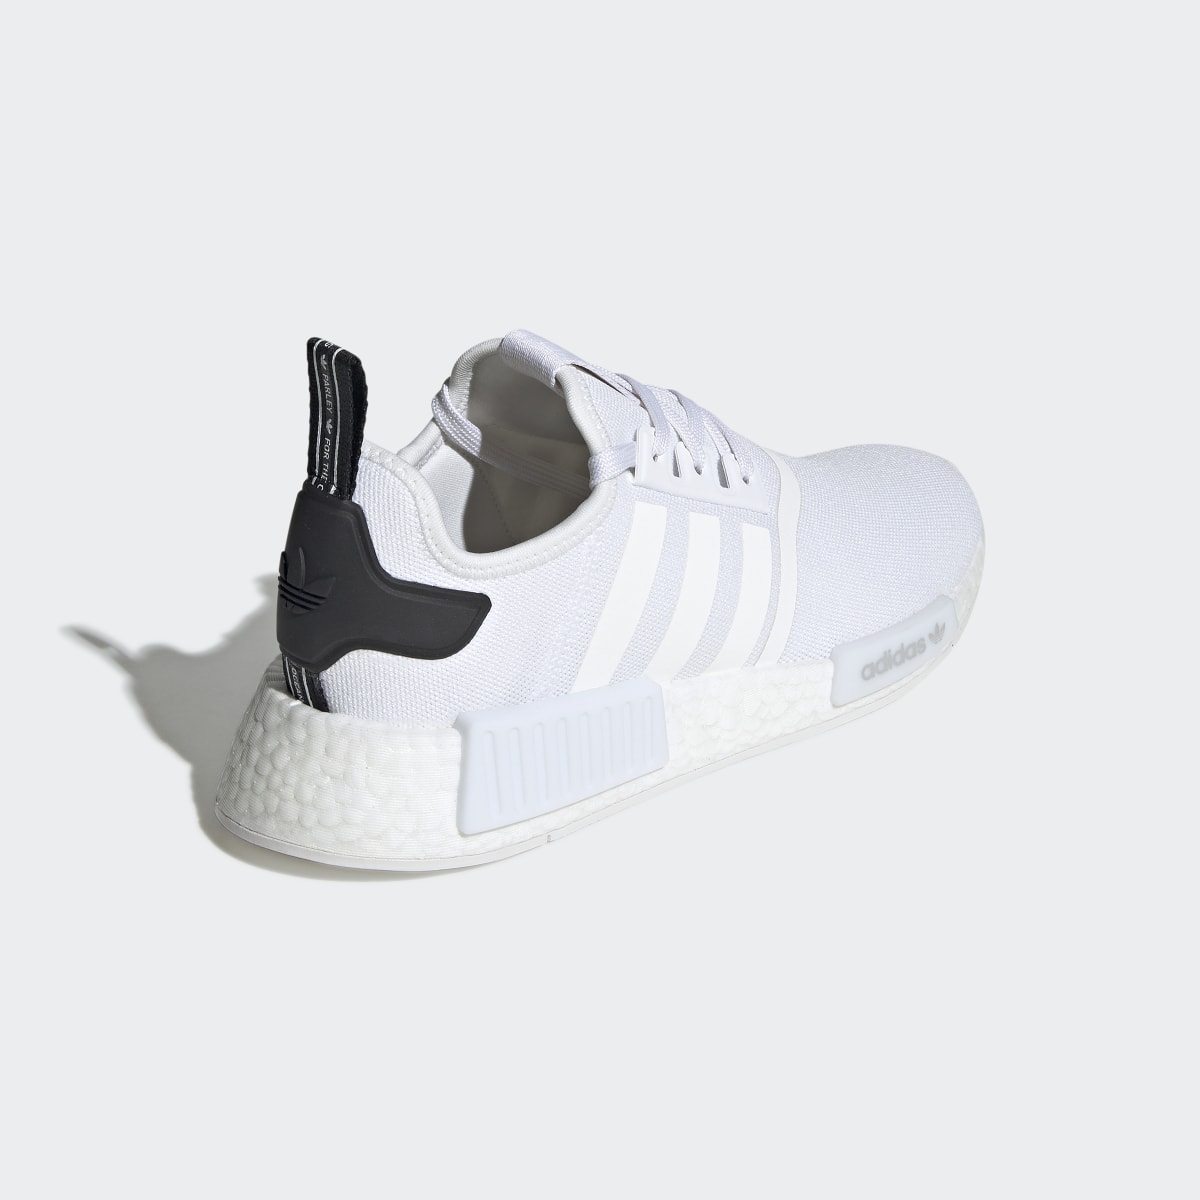 Adidas NMD_R1 Shoes. 6